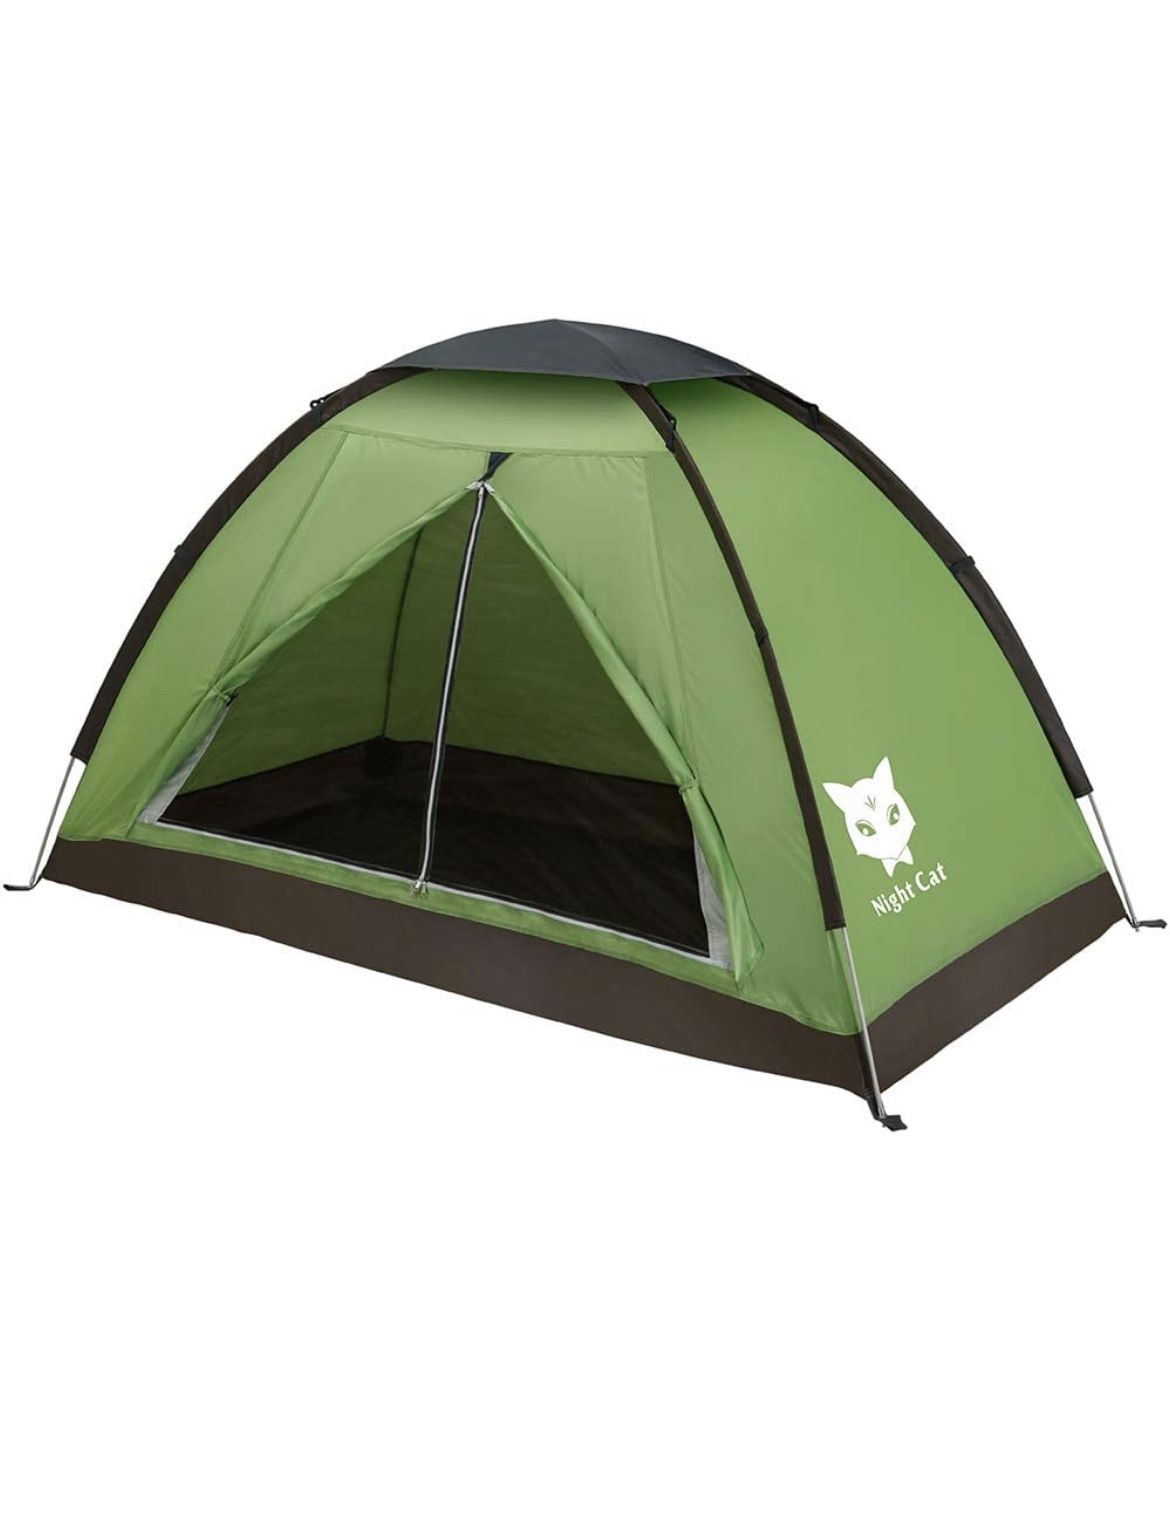 Night Cat Backpacking Tent for One 1 to 2 Persons Lightweight Waterproof